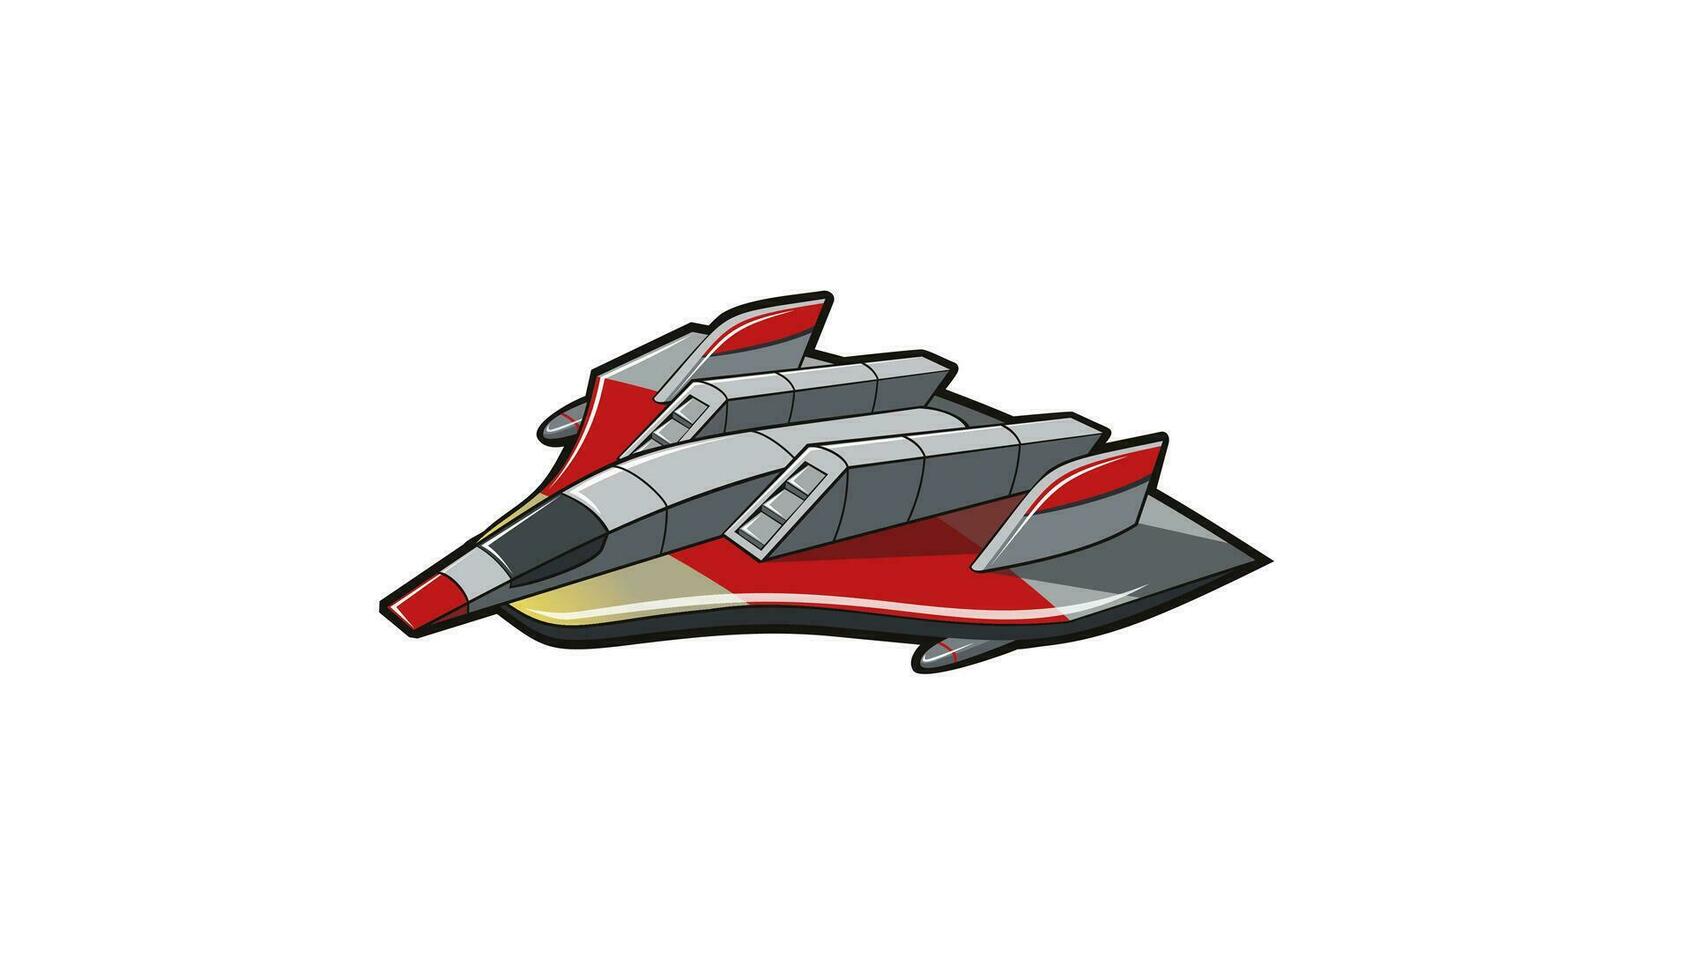 Spacecraft against white background. Futuristic spaceship. Flying object. Image of aircraft. Children picture. Vector illustration.